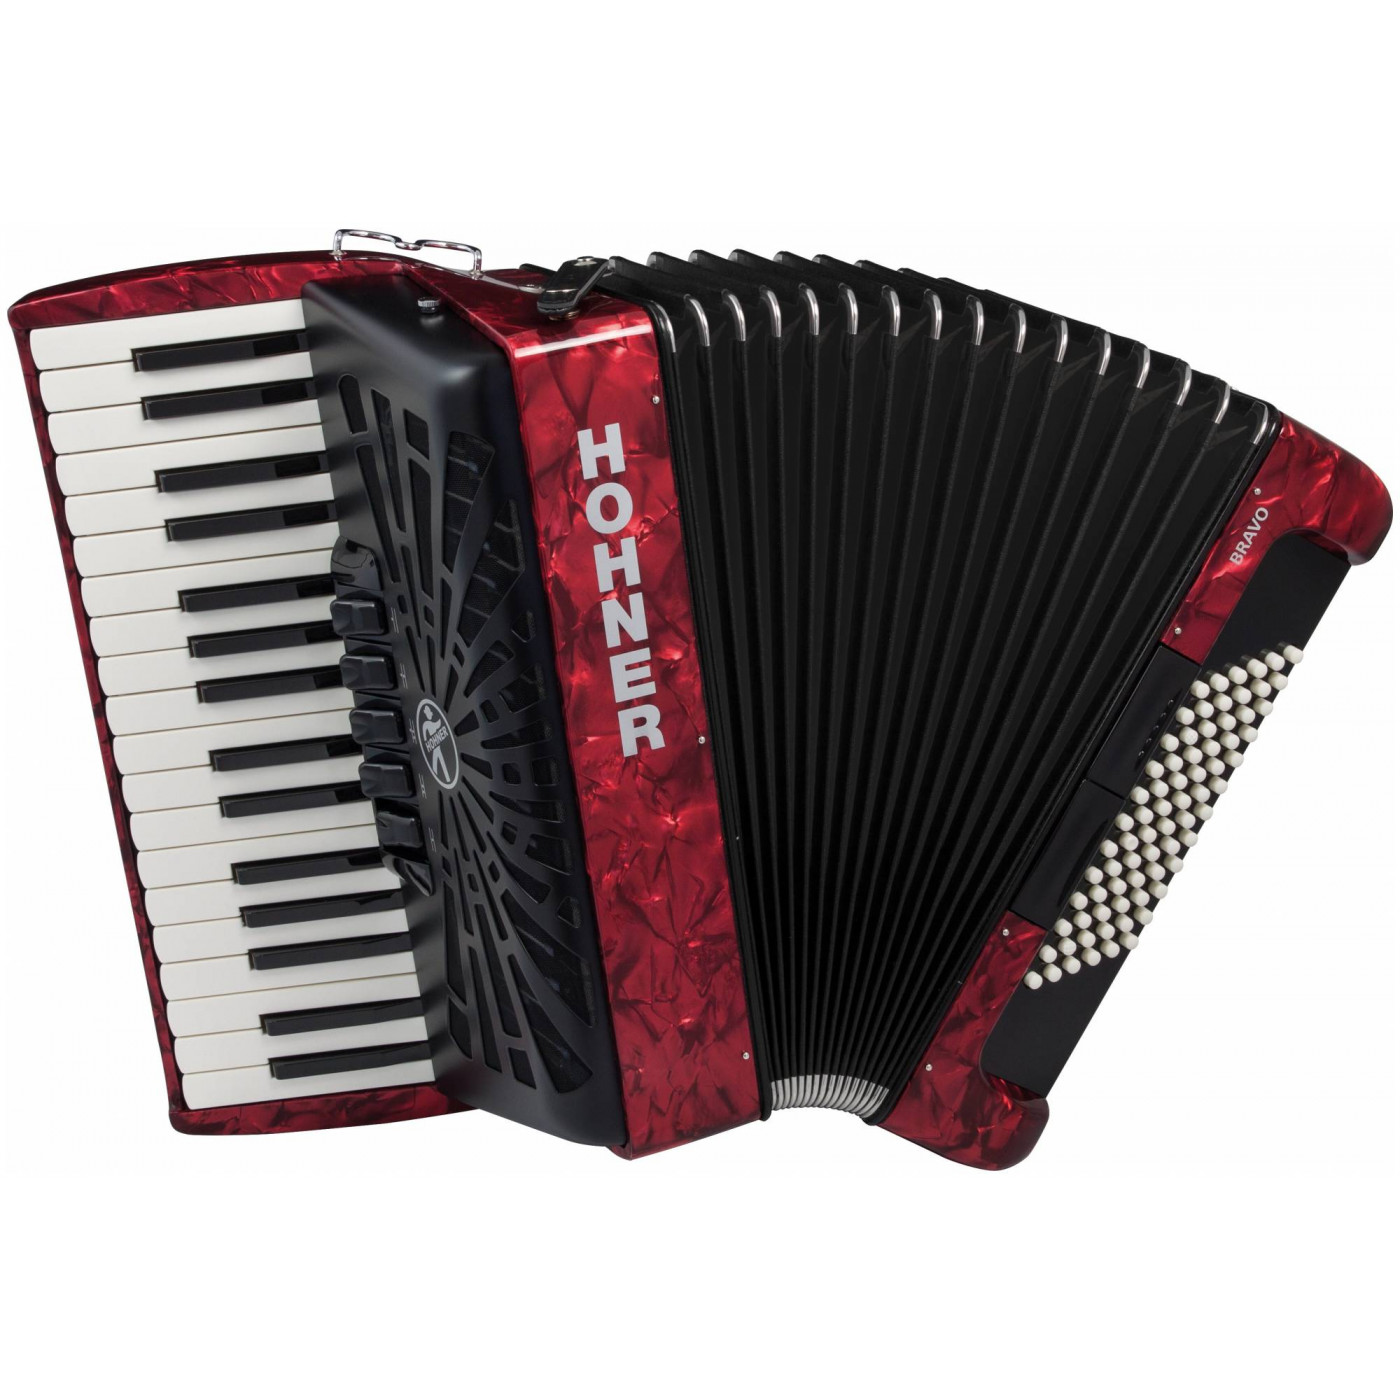 HOHNER The New Bravo III 72 (A16631) red